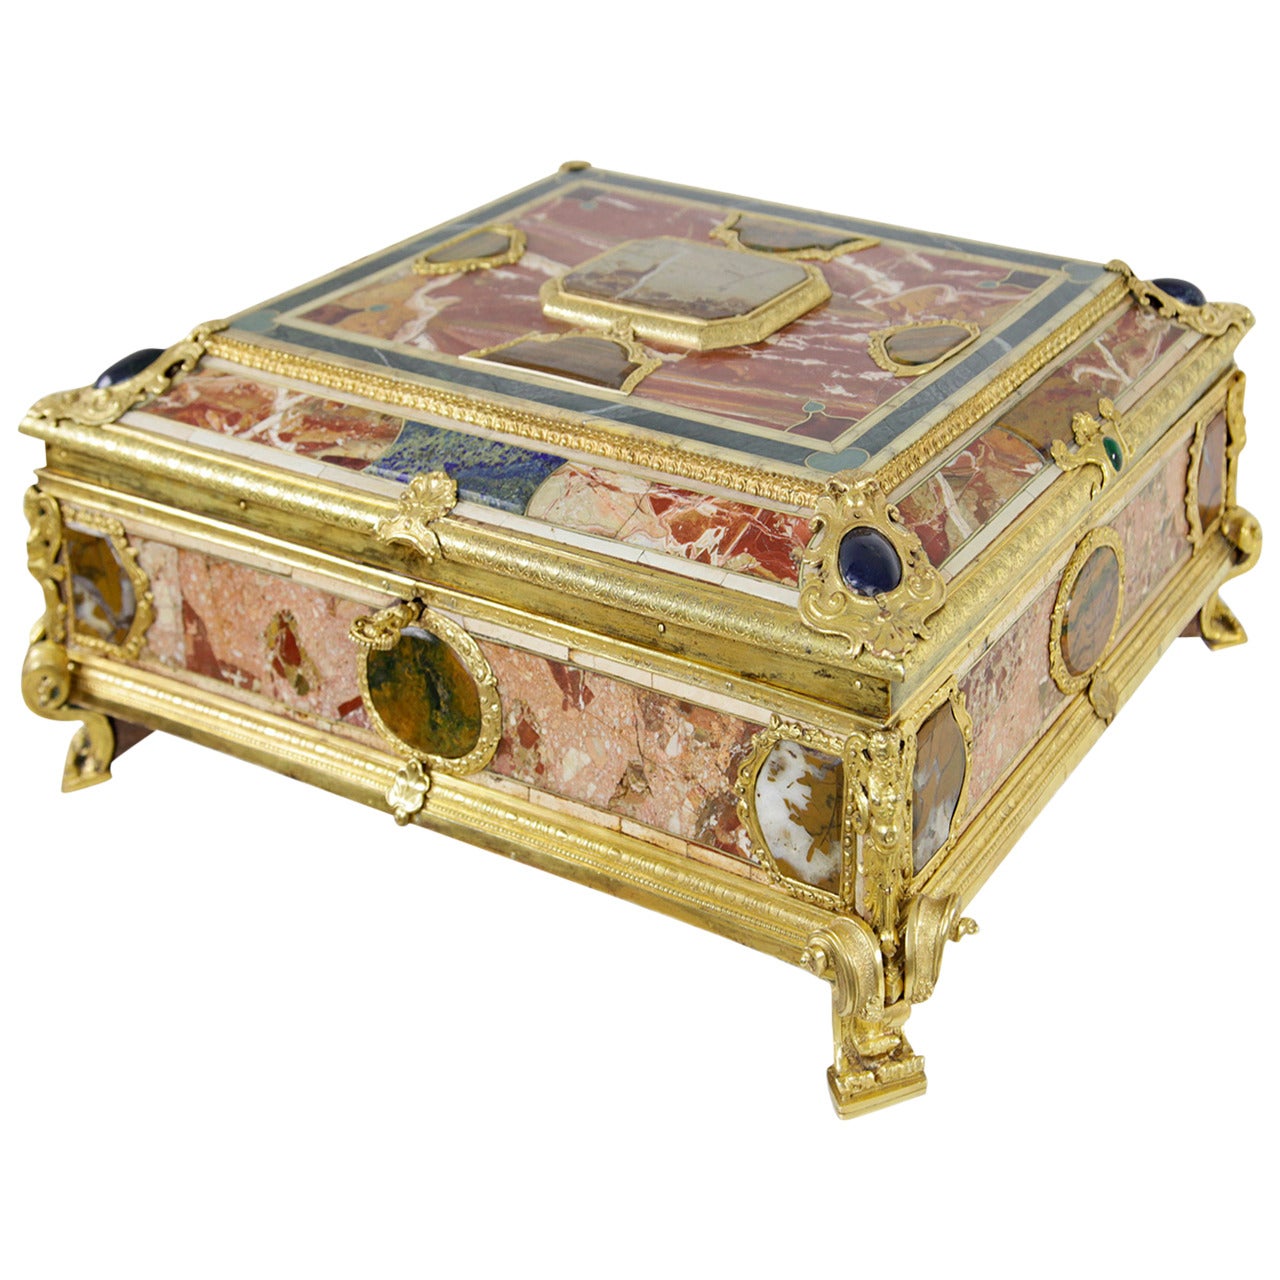 Stunning Document Casket with Marble and Semi-Precious Stones Occupied